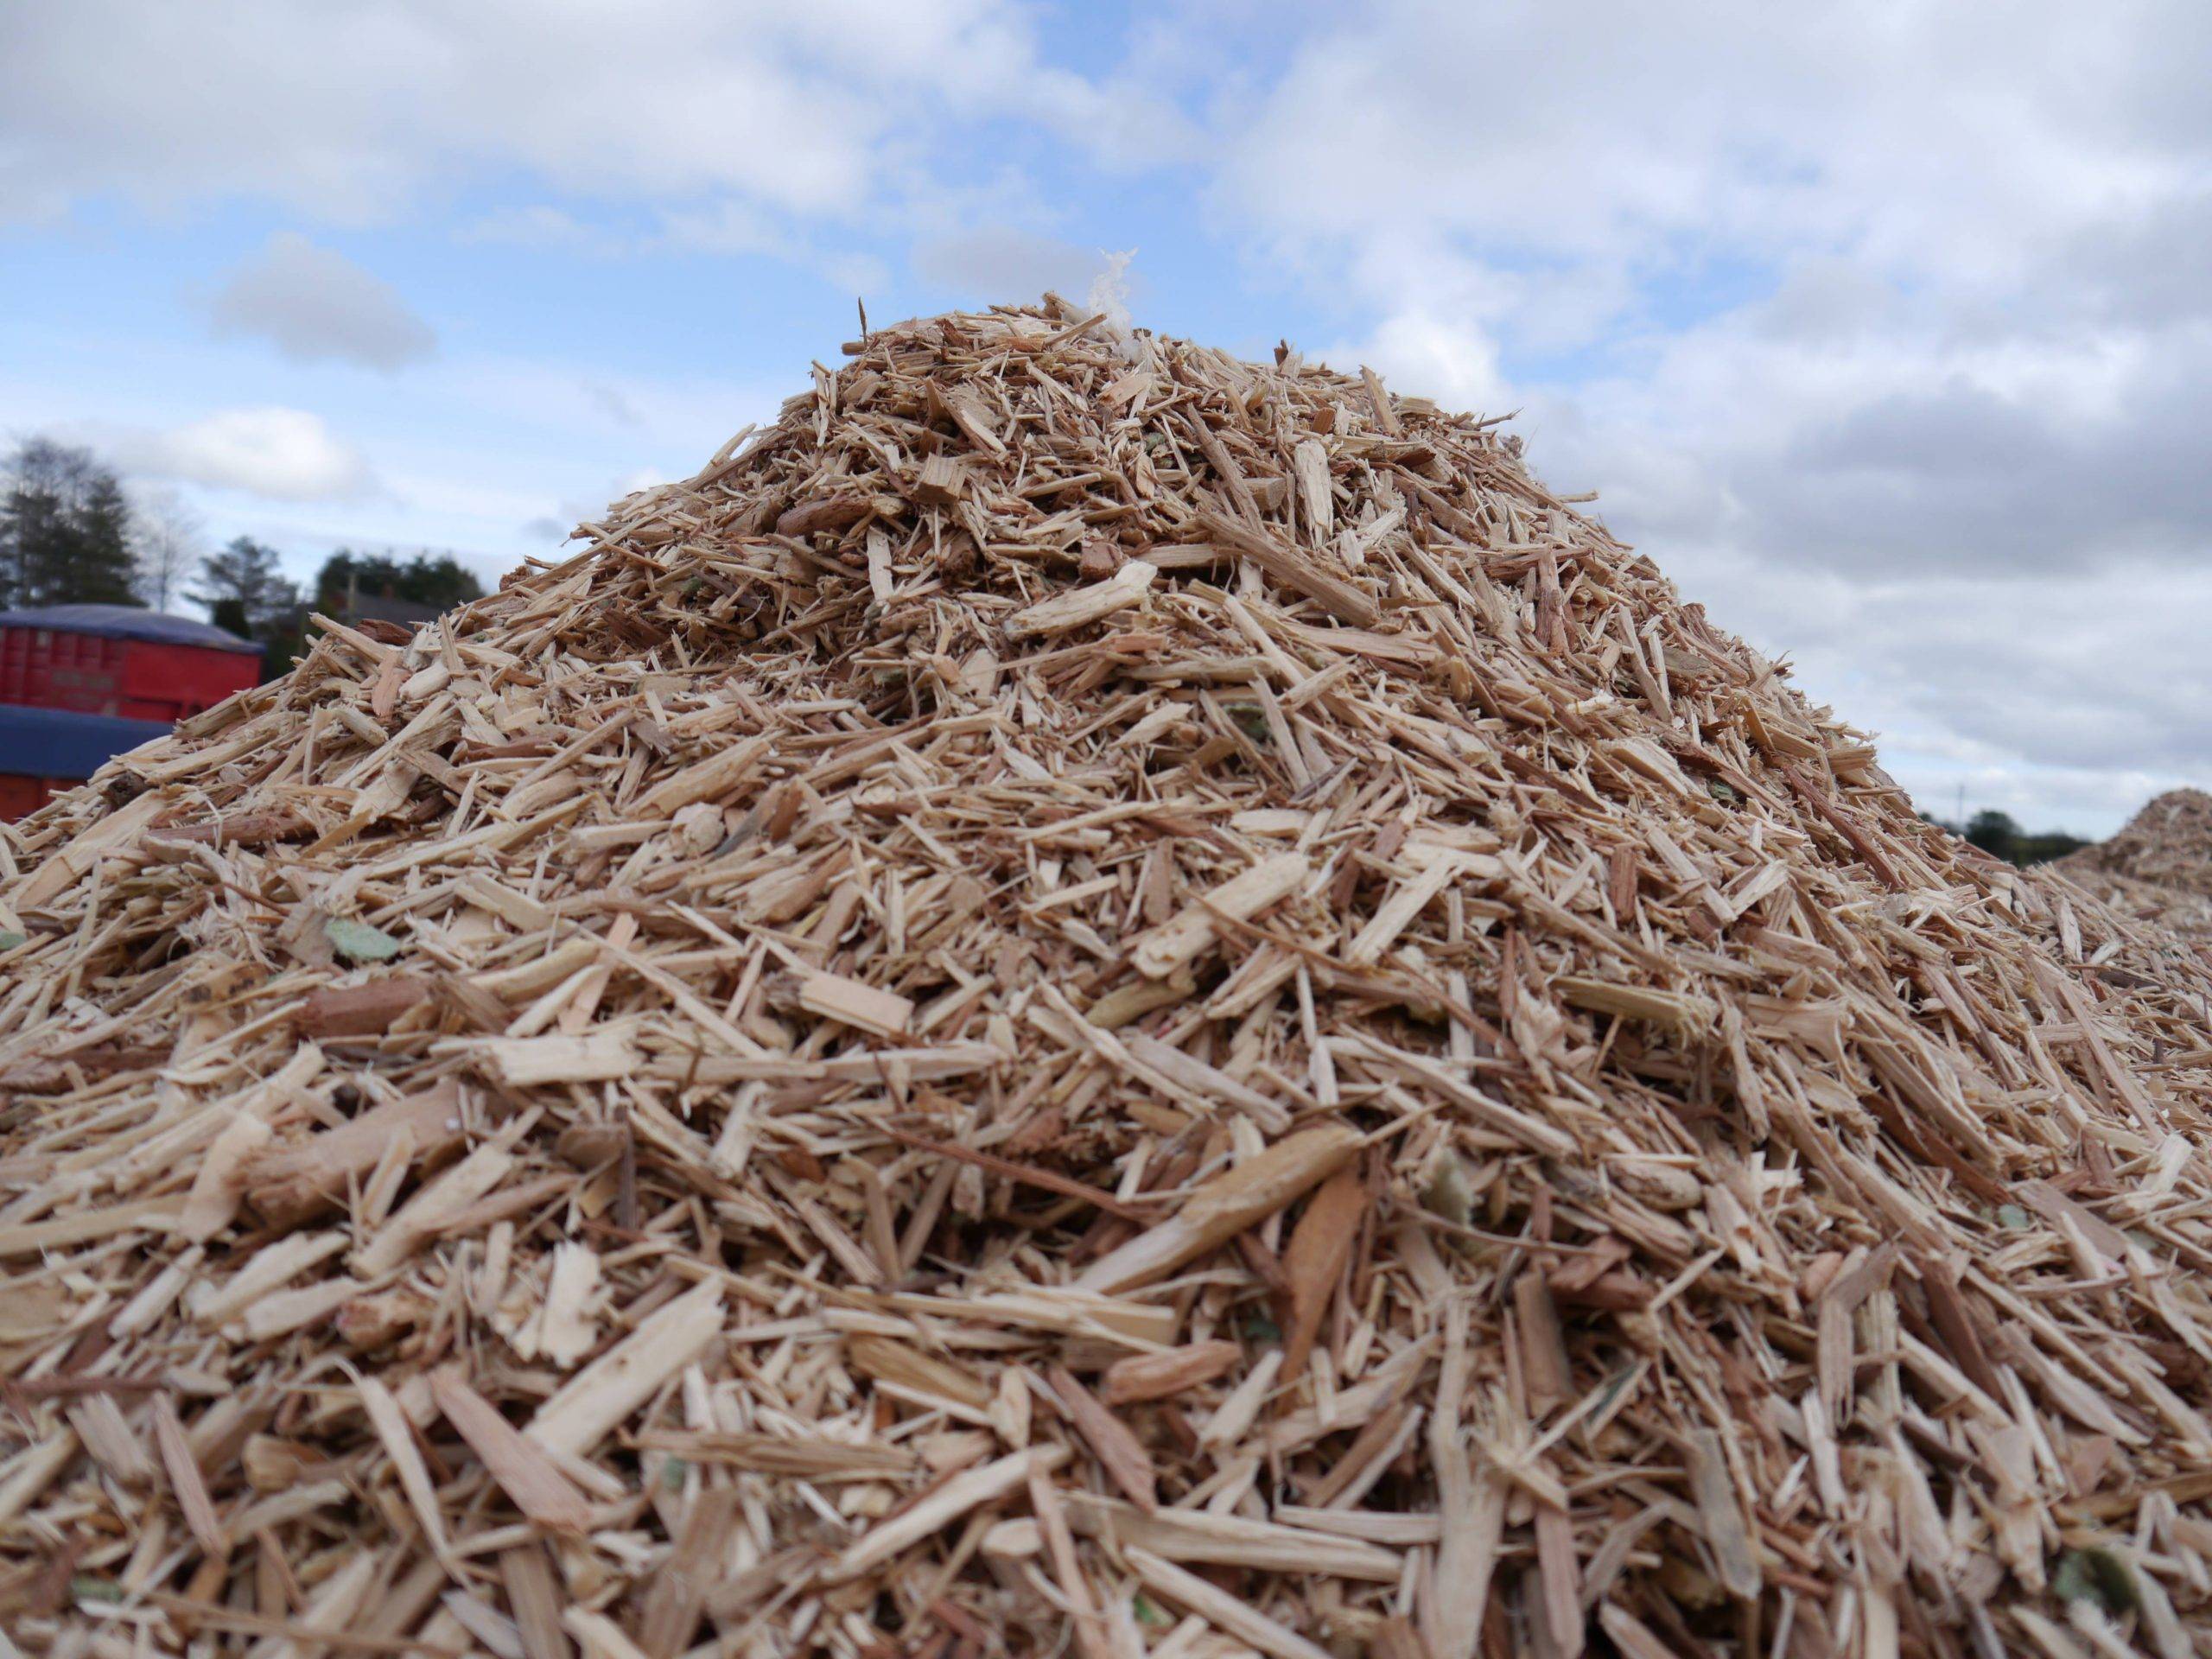 Quality biomass fuel in Nottinghamshire